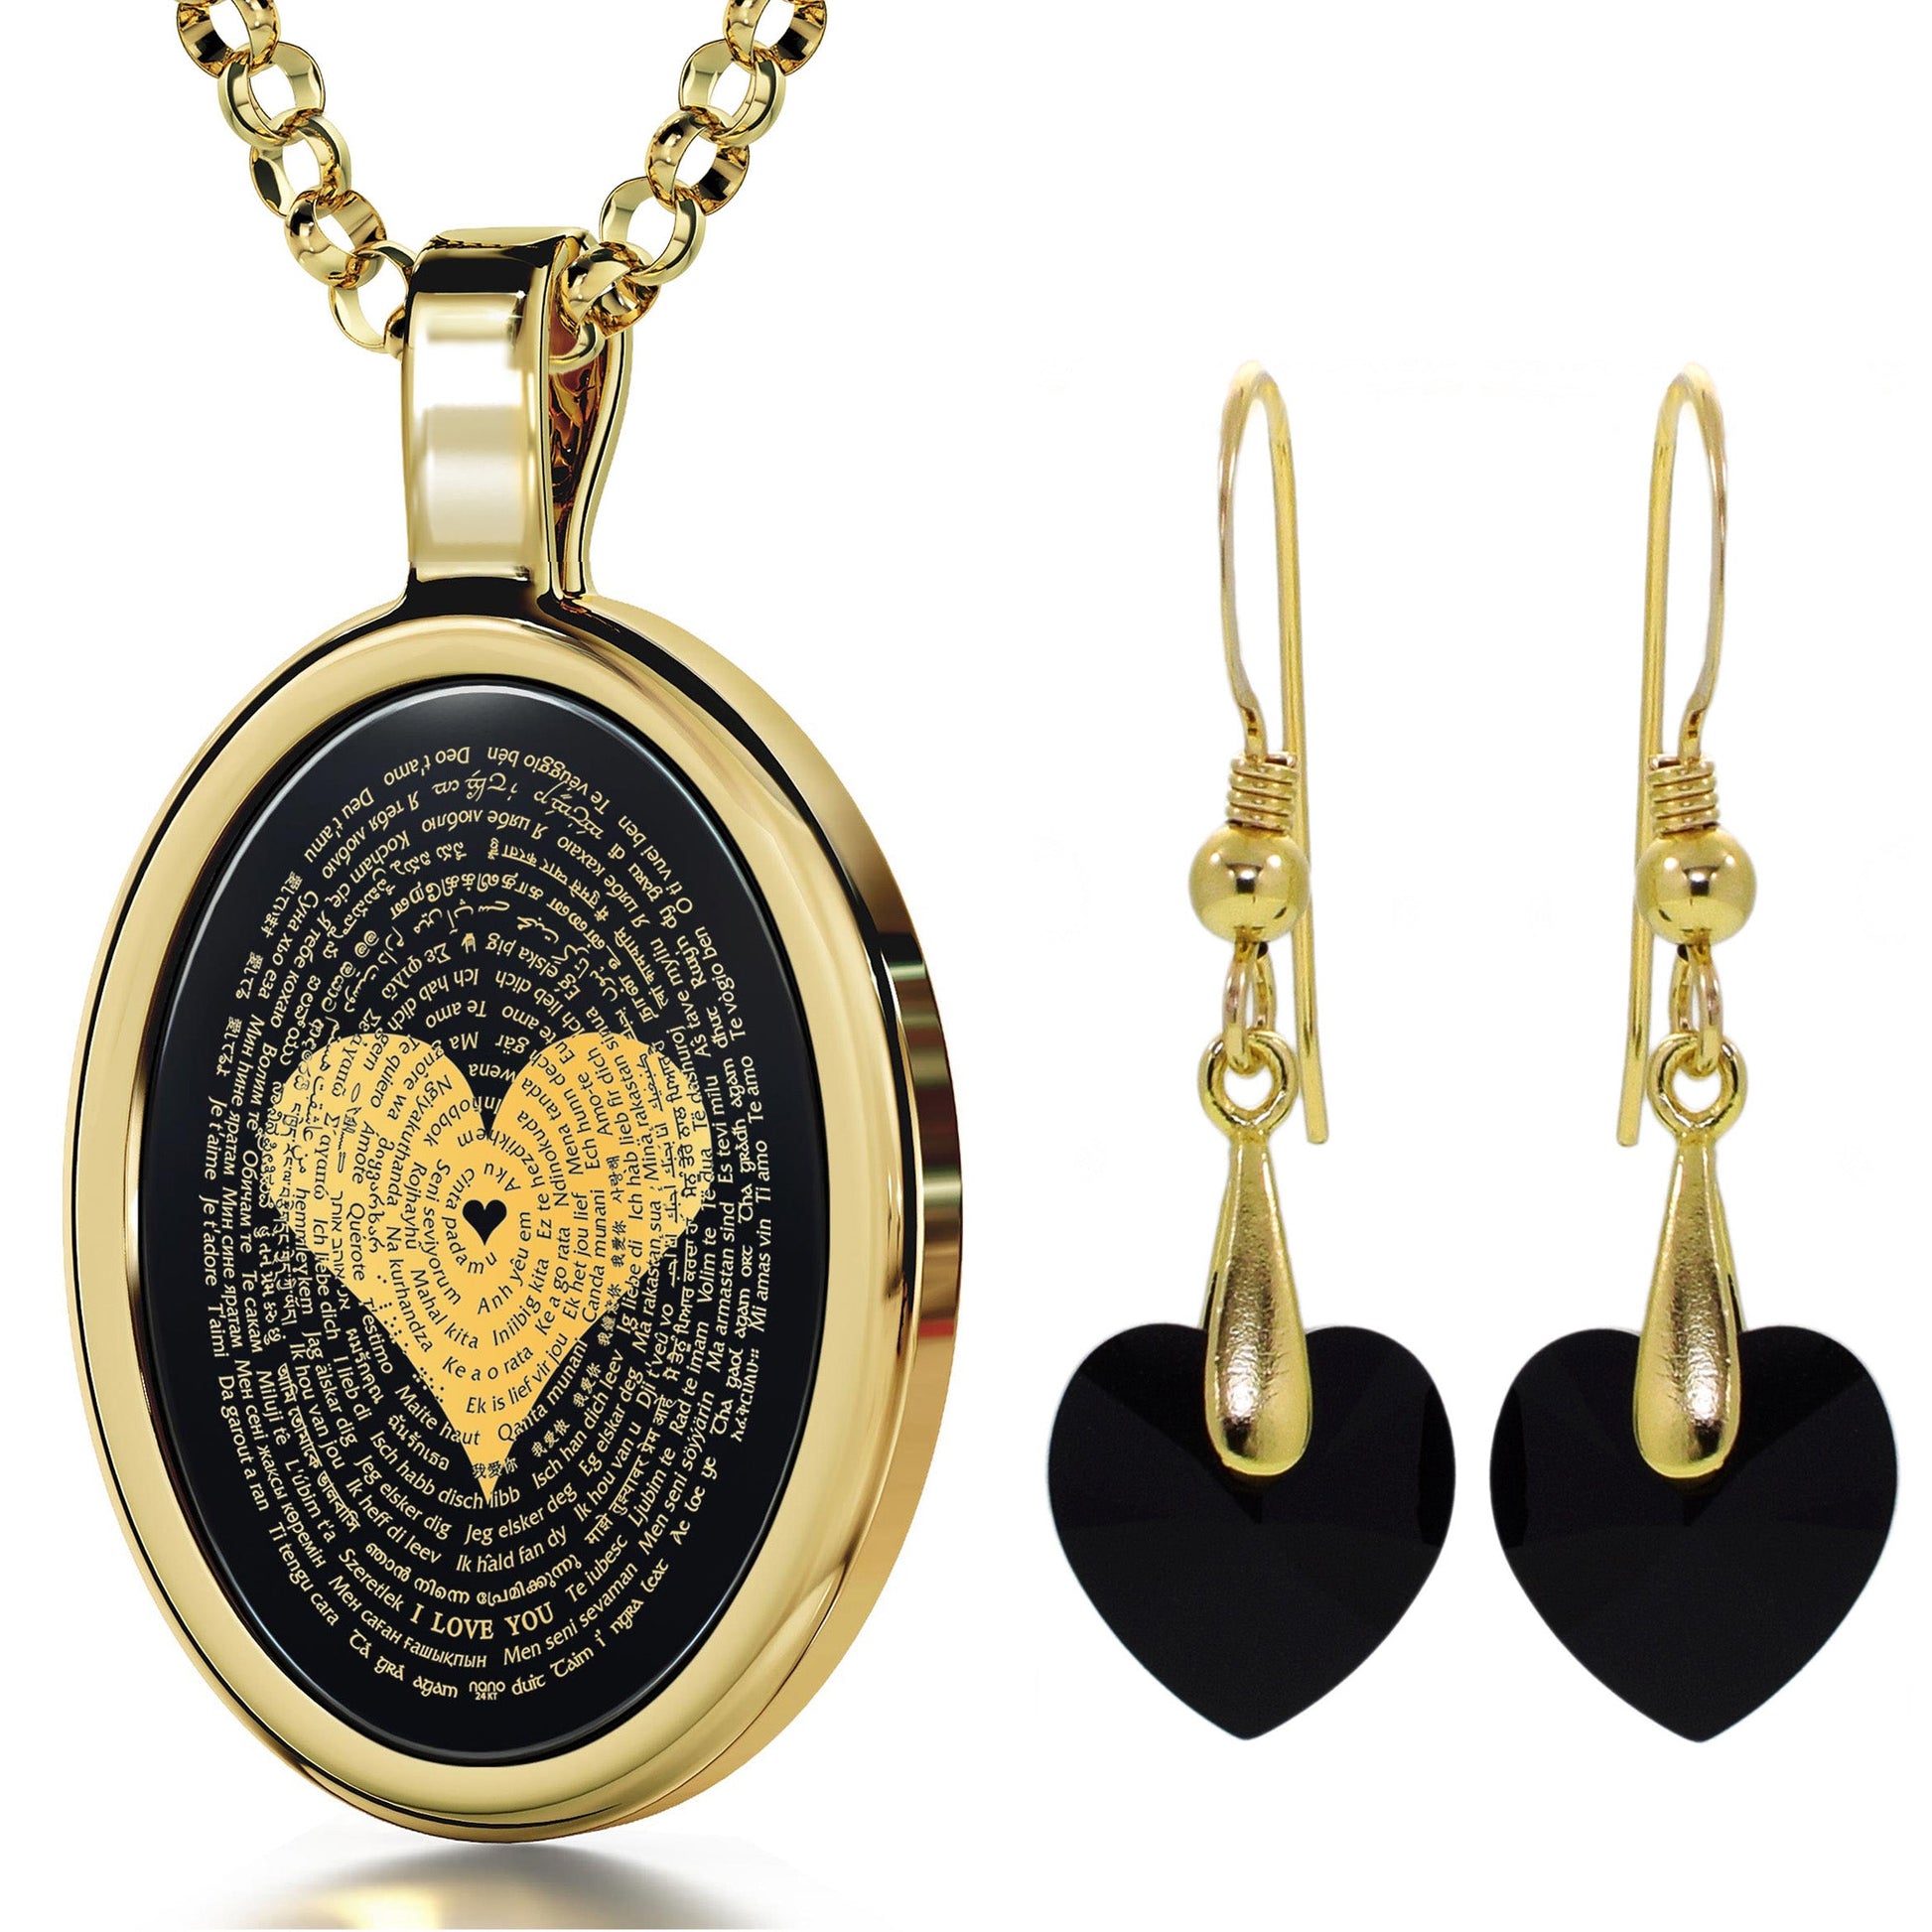 A black and gold "Multilingual I Love You" 24k Gold Necklace & Earrings Set with the words i love you written on it, by Maramalive™.